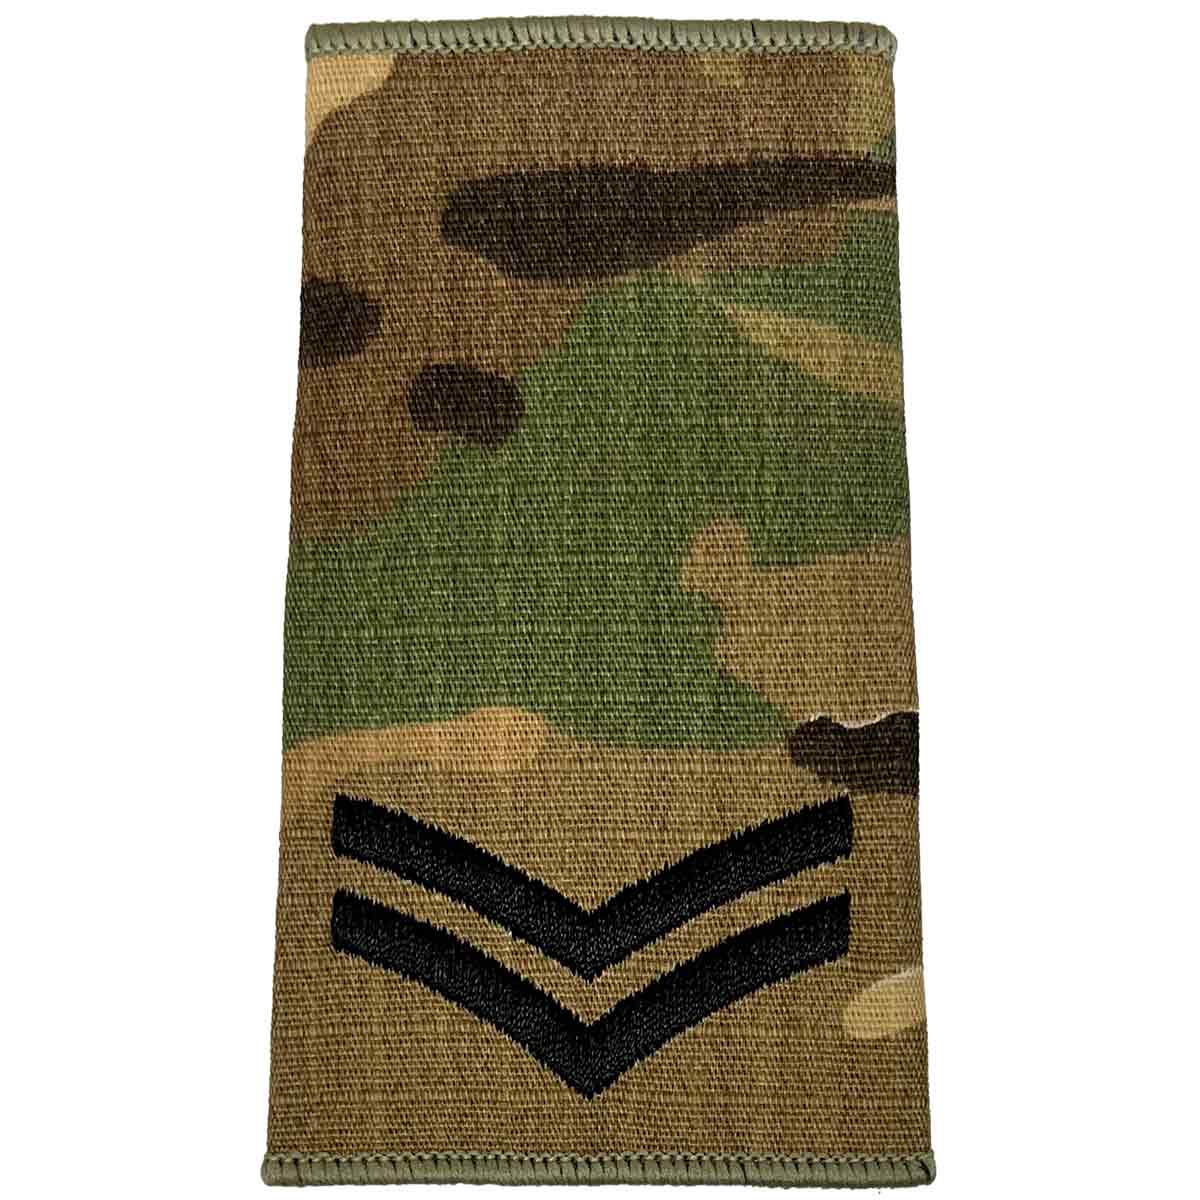 Multicam Rank Slides with Black Embroidery (Pair) - John Bull Clothing